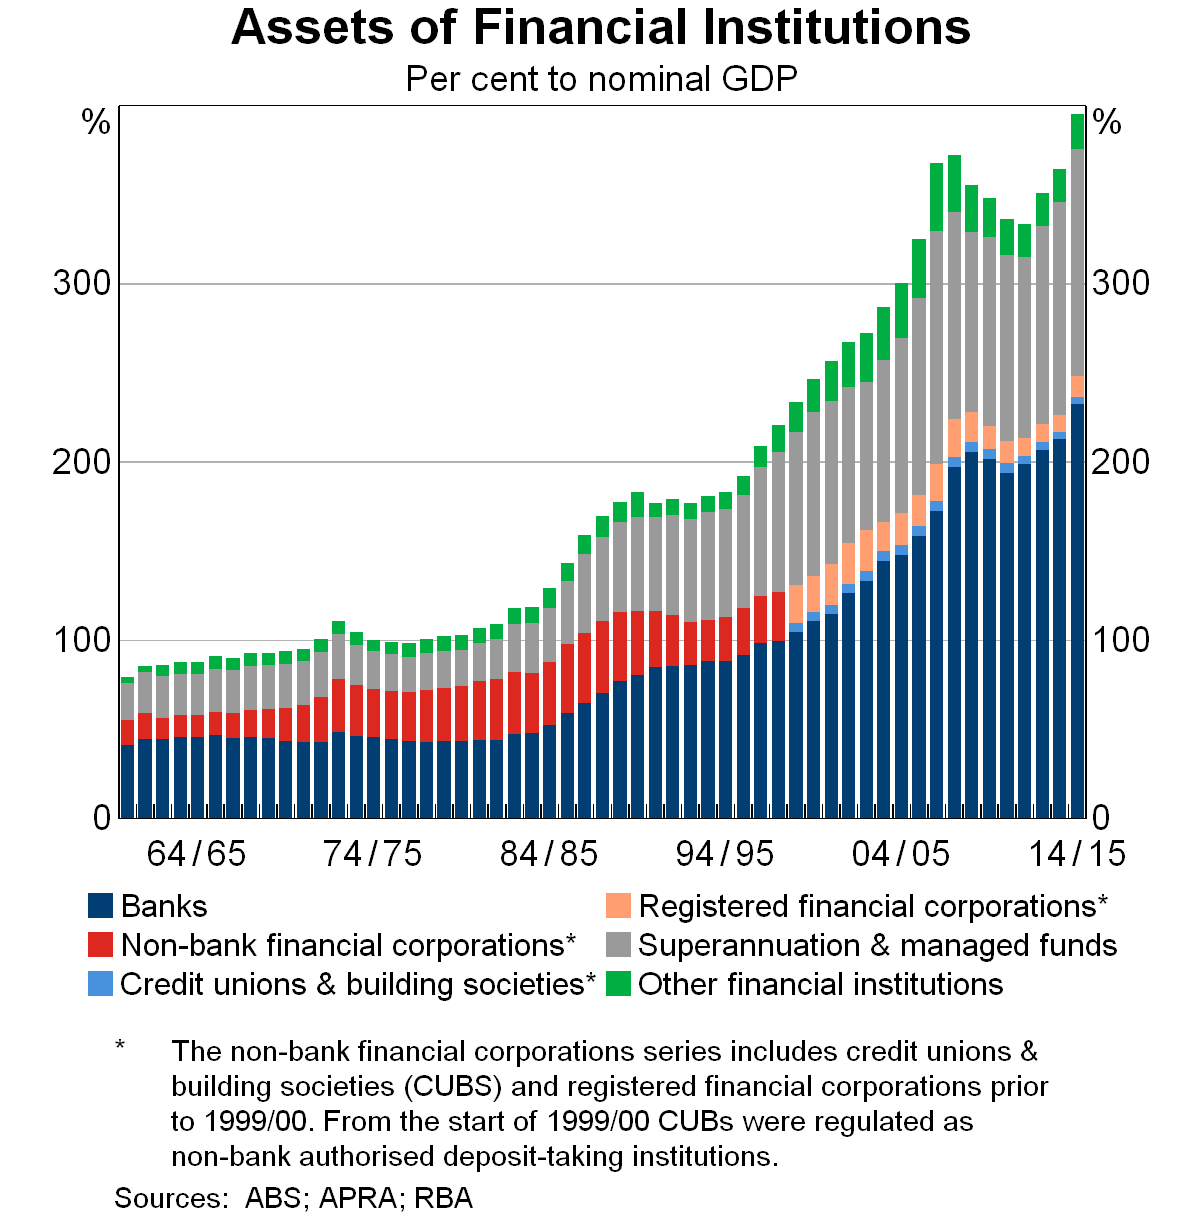 Graph 1: Assets of Financial Institutions